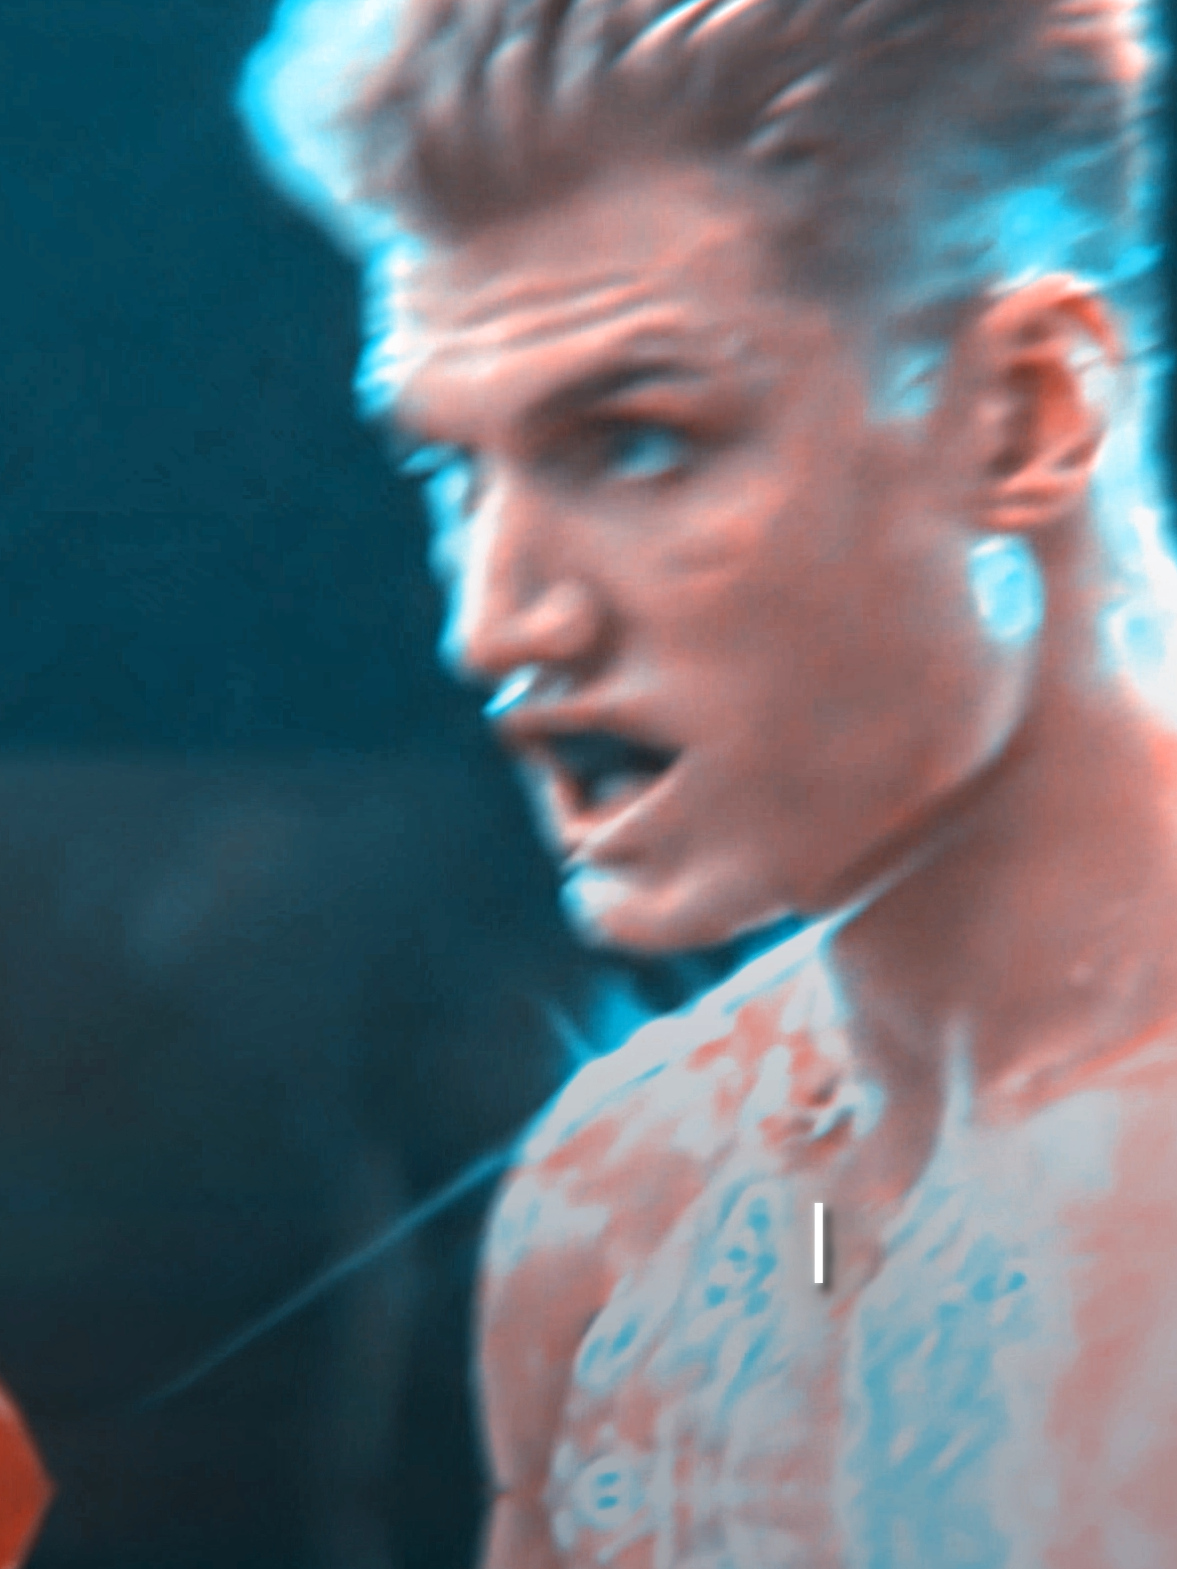 You will LOSE - Ivan Drago Edit | Viliam Lane - Particles (Ultra Slowed) Other links:  My CC's and quality: https://payhip.com/yaniksksks My YouTube: https://www.youtube.com/channel/UCw_1vb3P8A5dLY9i1e-_lkA My Instagram: https://www.instagram.com/yaniksksks_official/ #rocky #rockybalboa #rocky4 #ivandrago #drago #sylvesterstallone #dolphlundgren #sport #gym #motivation #film #movie #edit #edits #viral